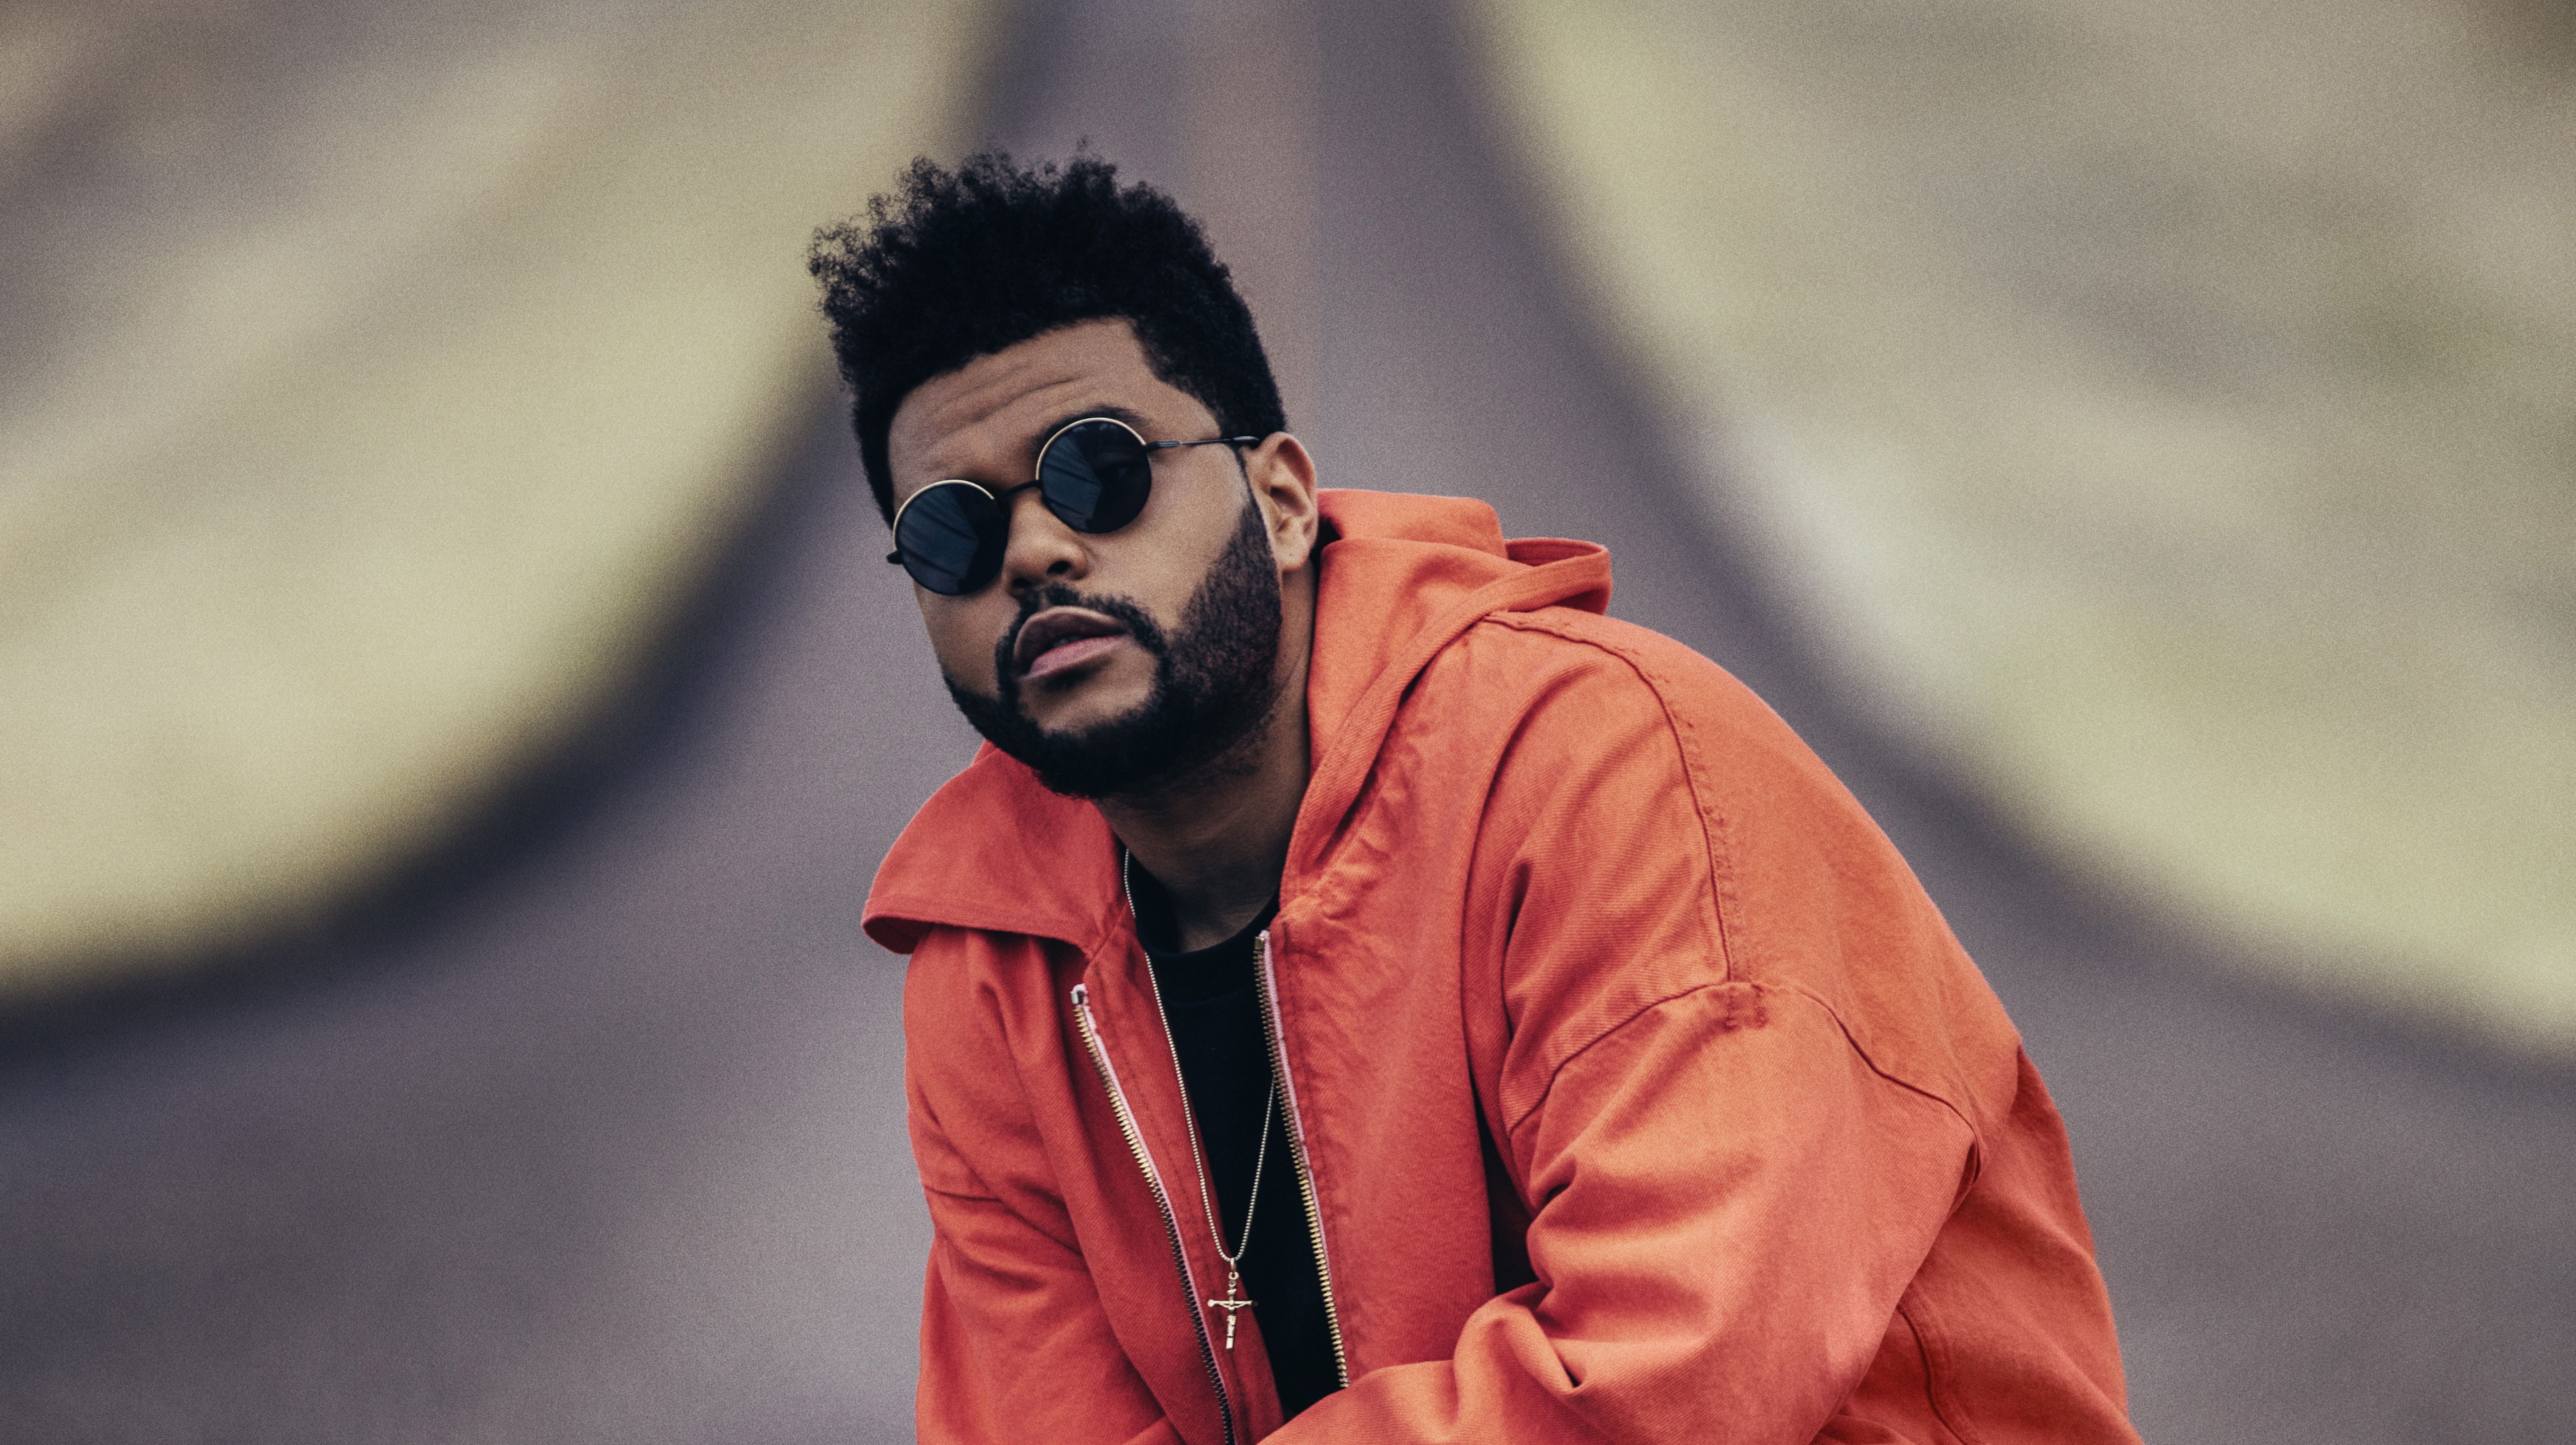 Why does Abel Tesfaye use the stage name 'The Weeknd?' + Wallpaper!